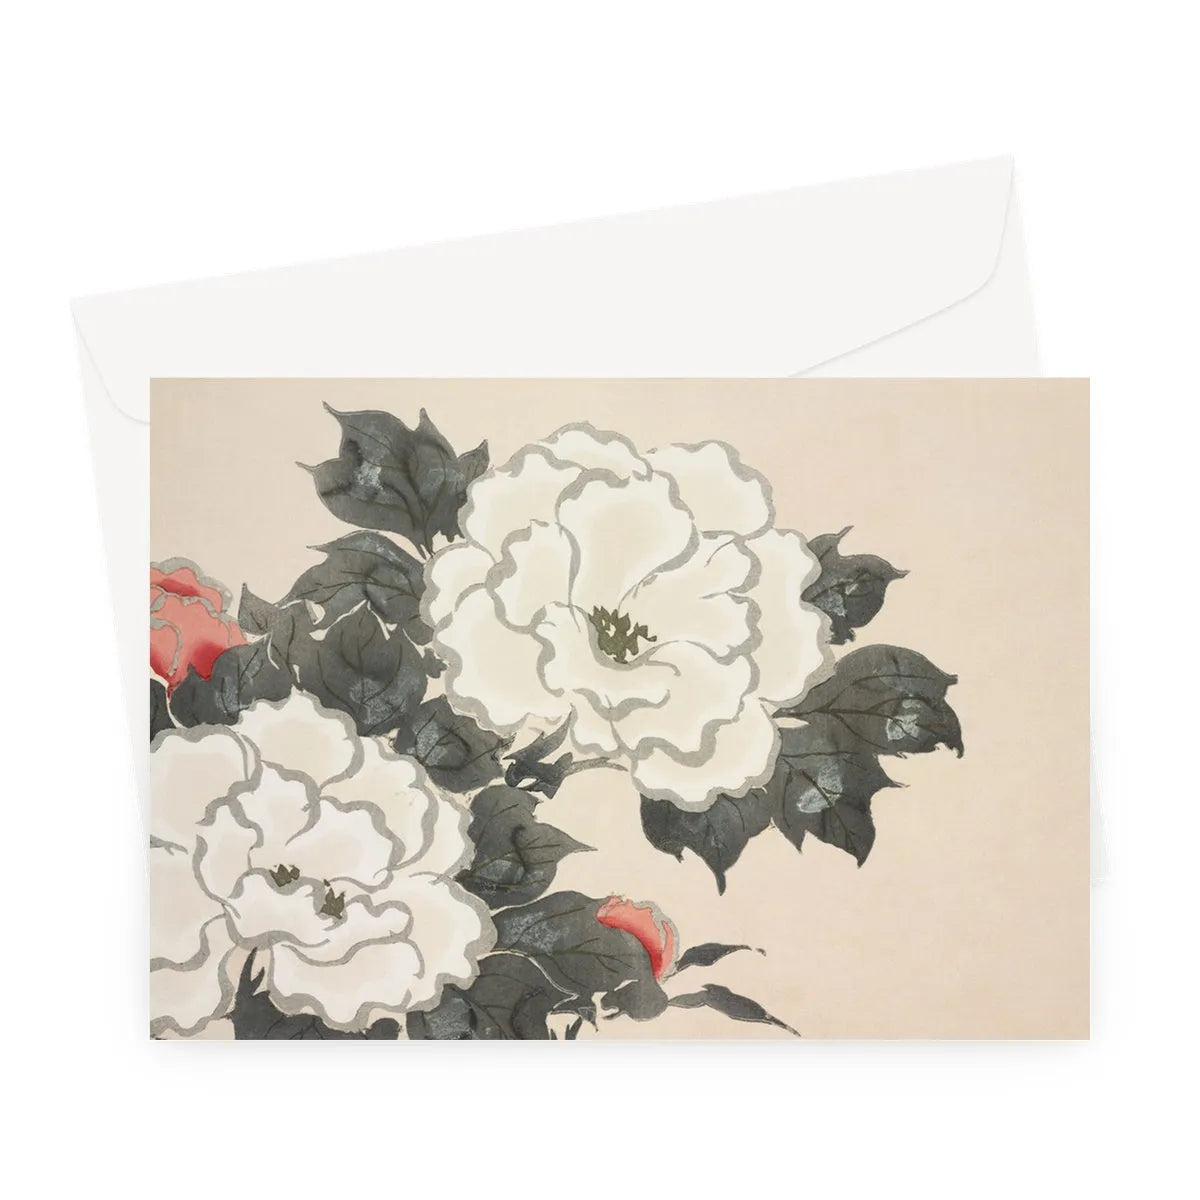 Flowers From Momoyogusa By Kamisaka Sekka Greeting Card - A5 Landscape / 1 Card - Greeting & Note Cards - Aesthetic Art